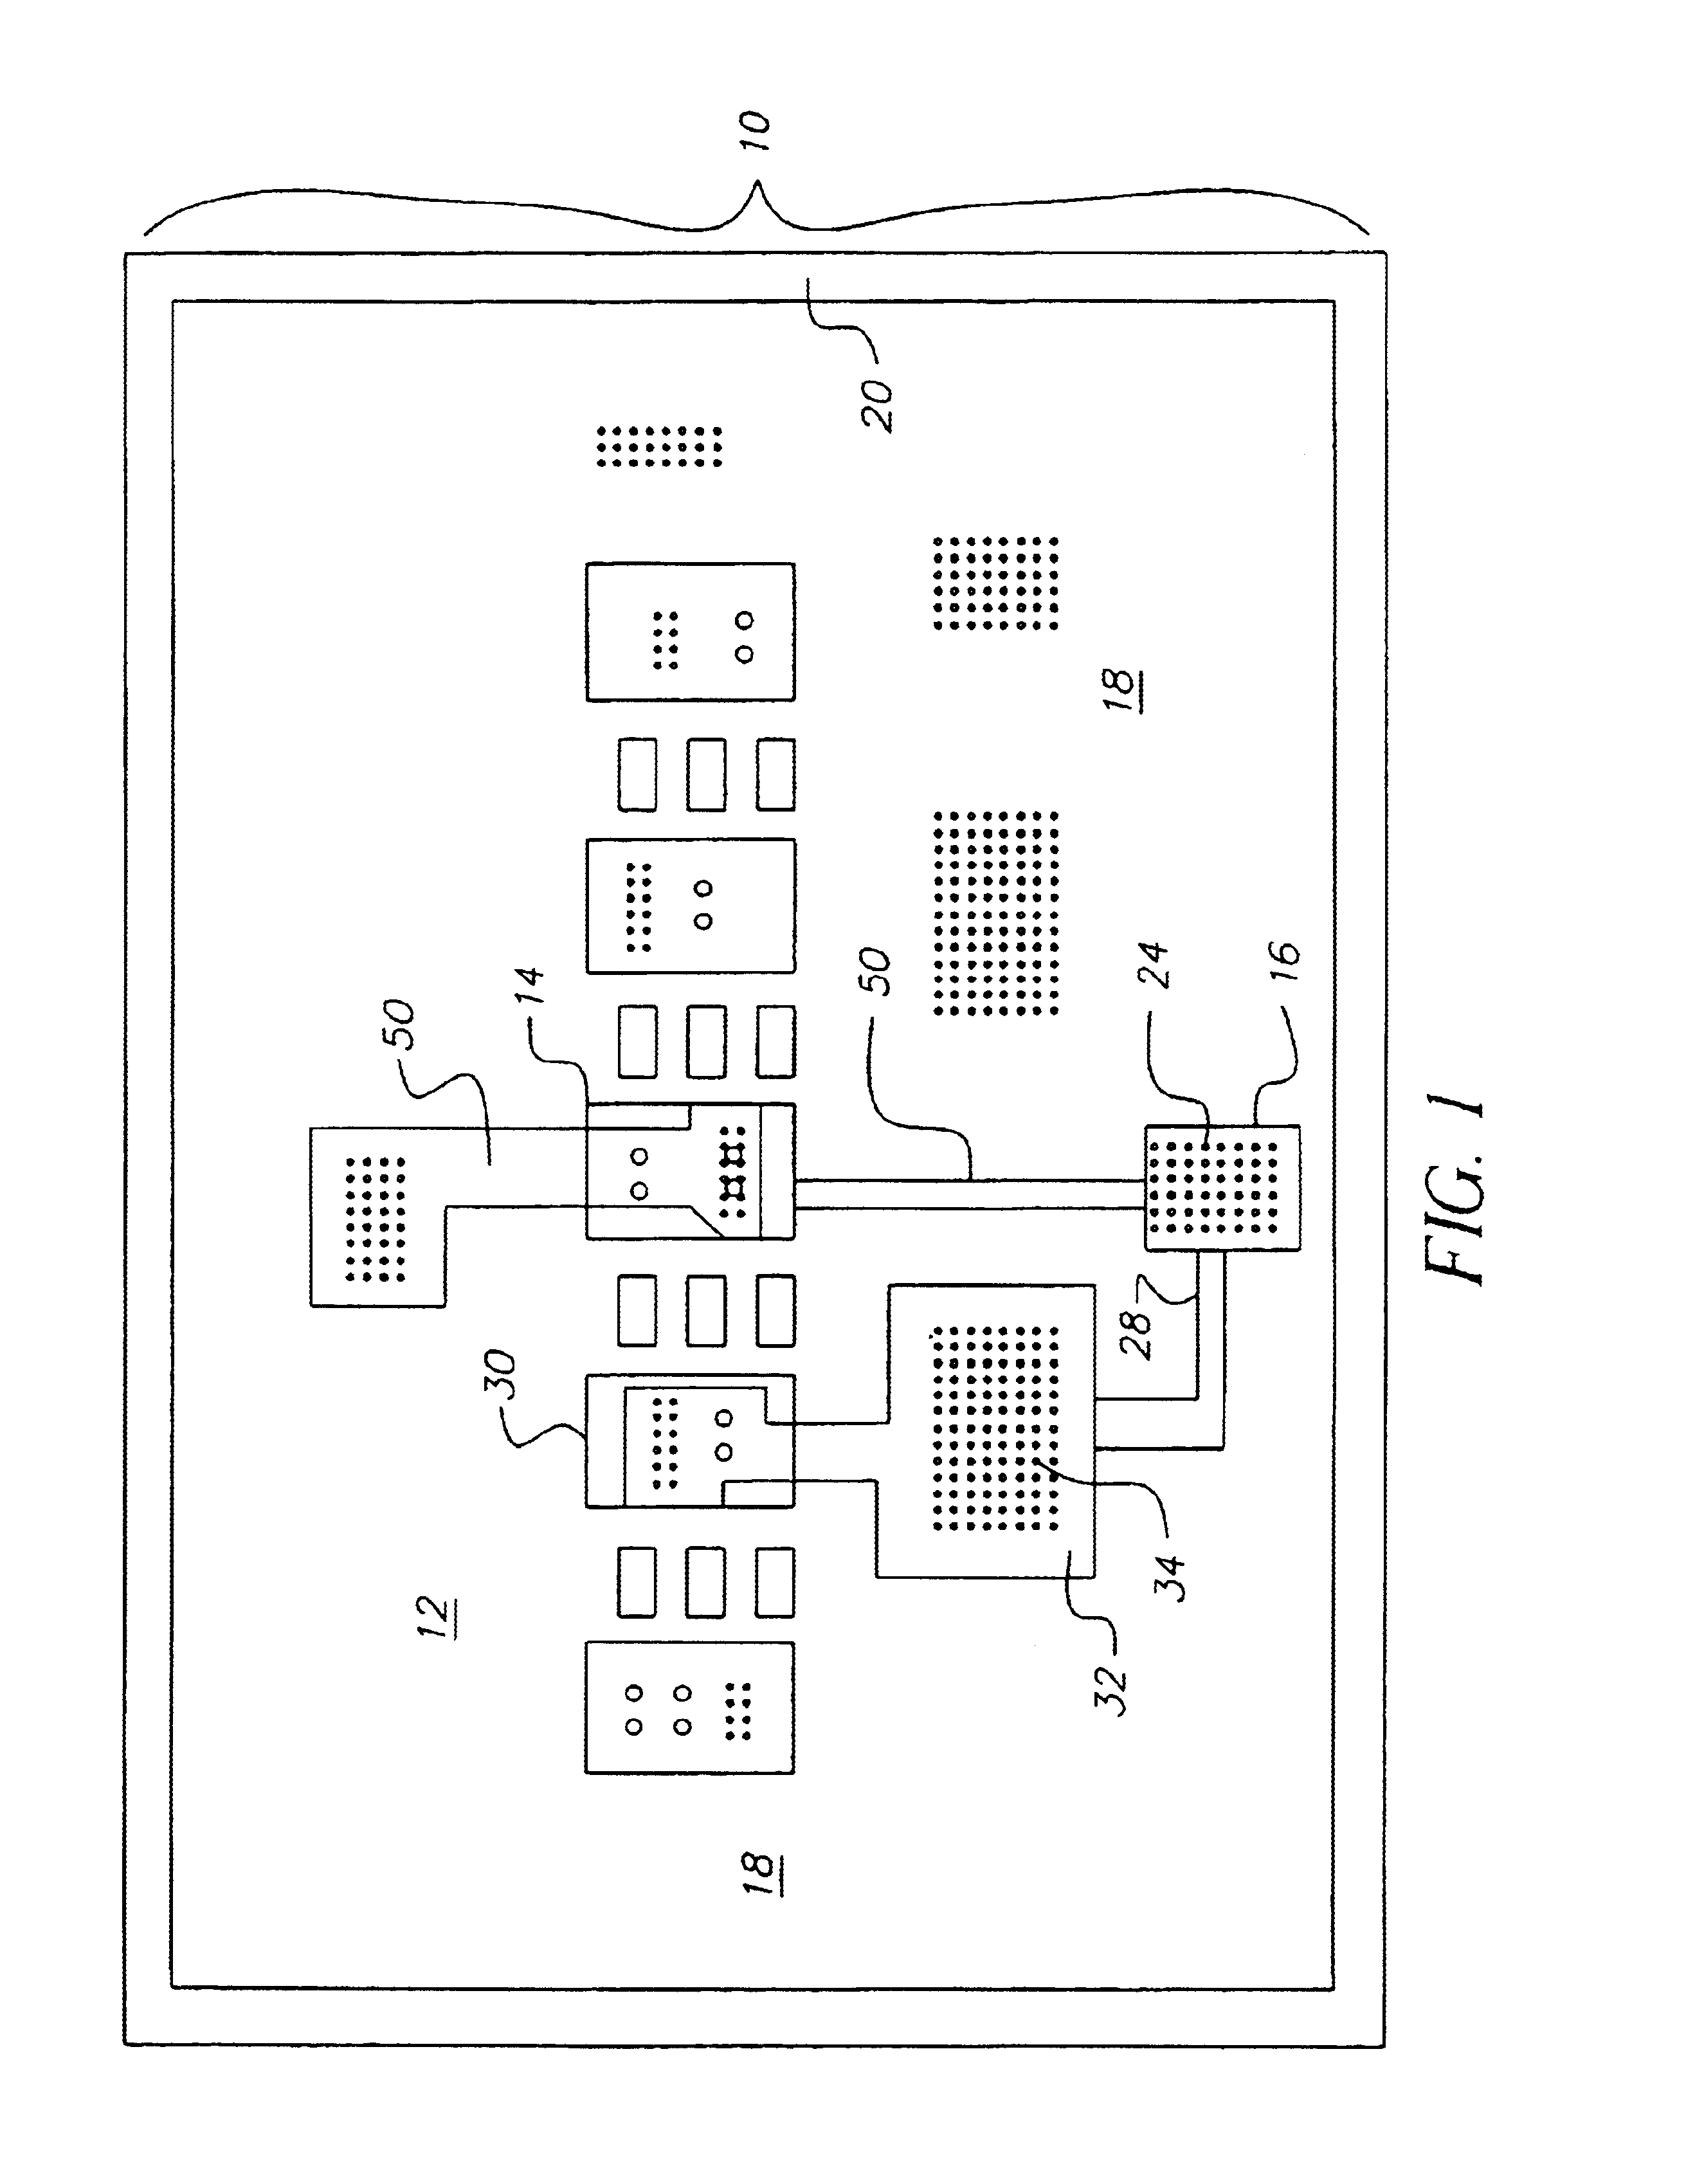 Densely packed electronic assemblage with heat removing element